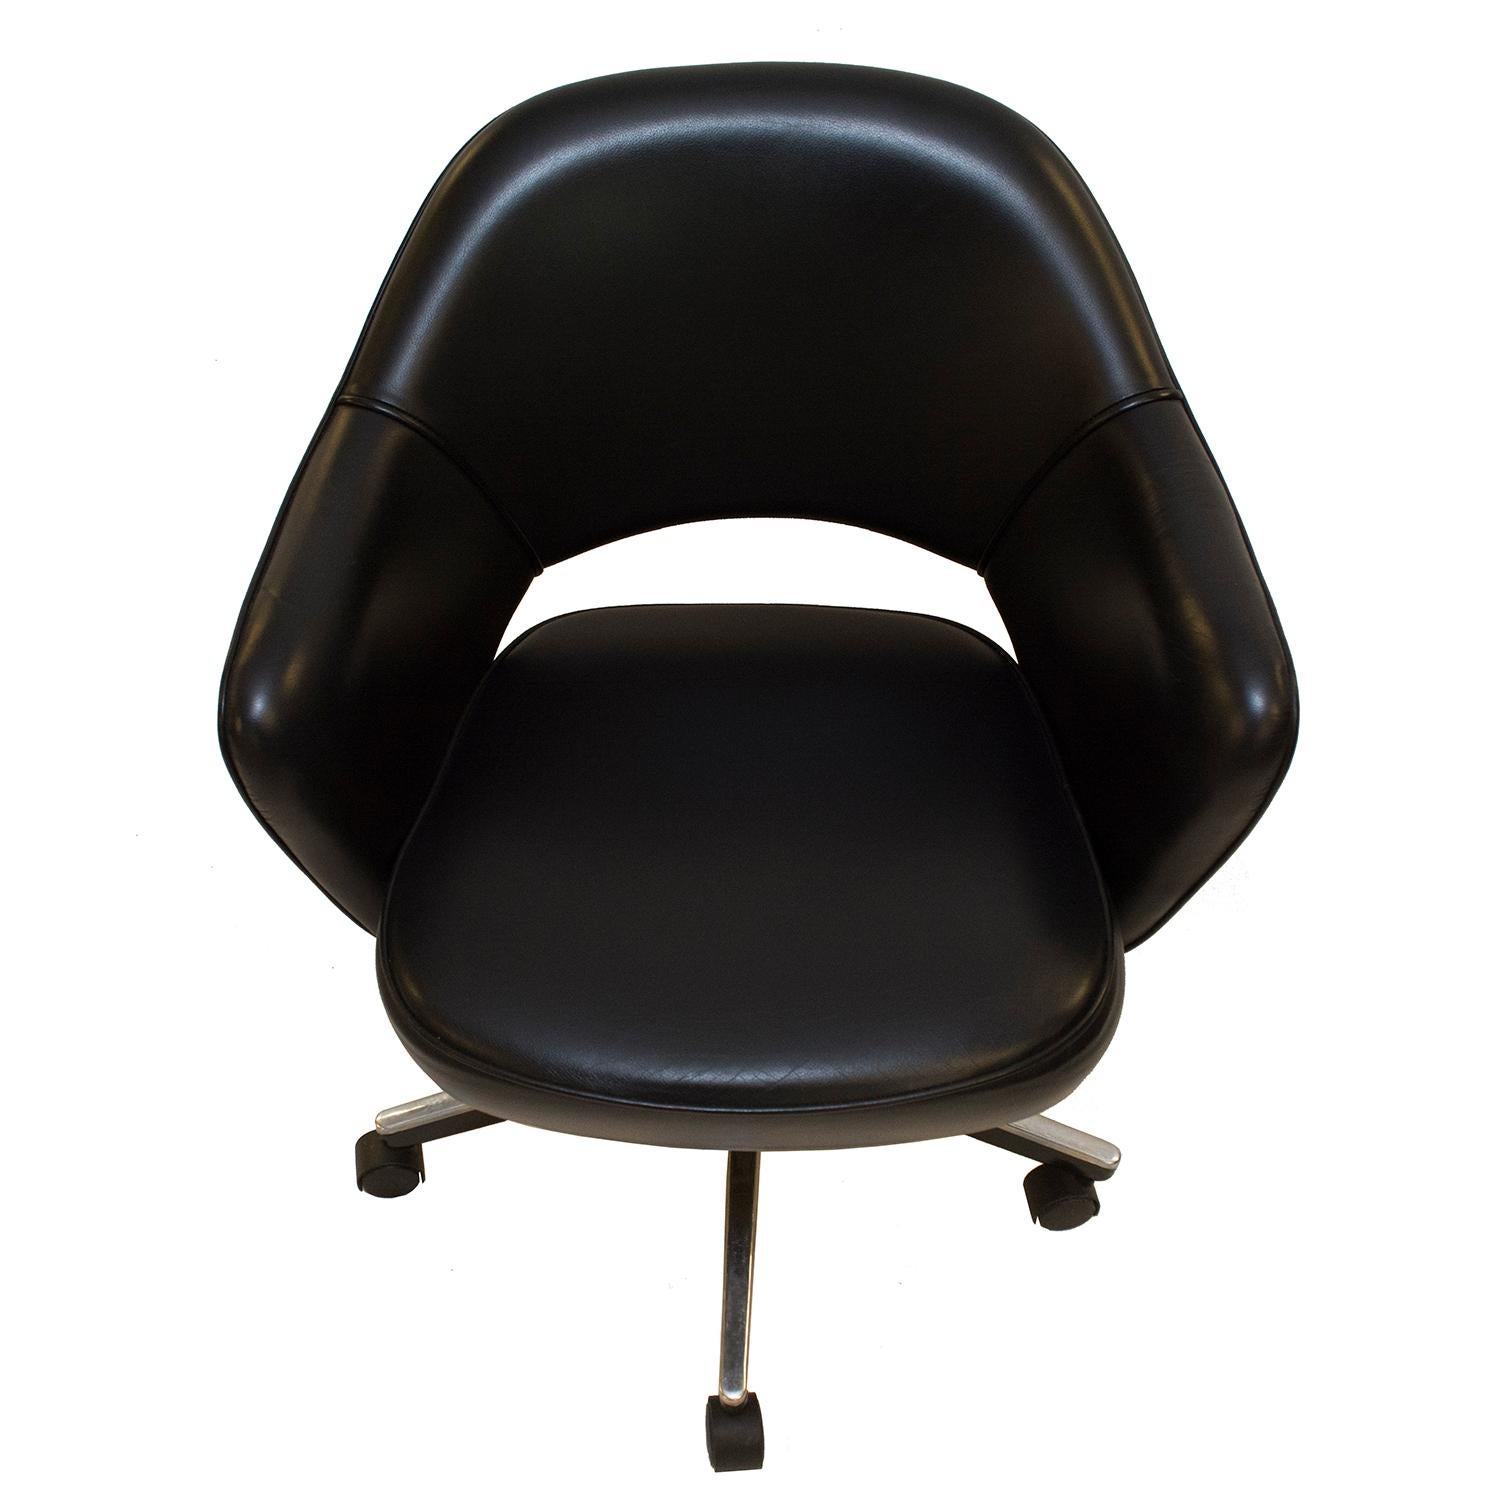 Polished Saarinen Executive Arm Chair in Original Black Leather, Contemporary Swivel Base For Sale